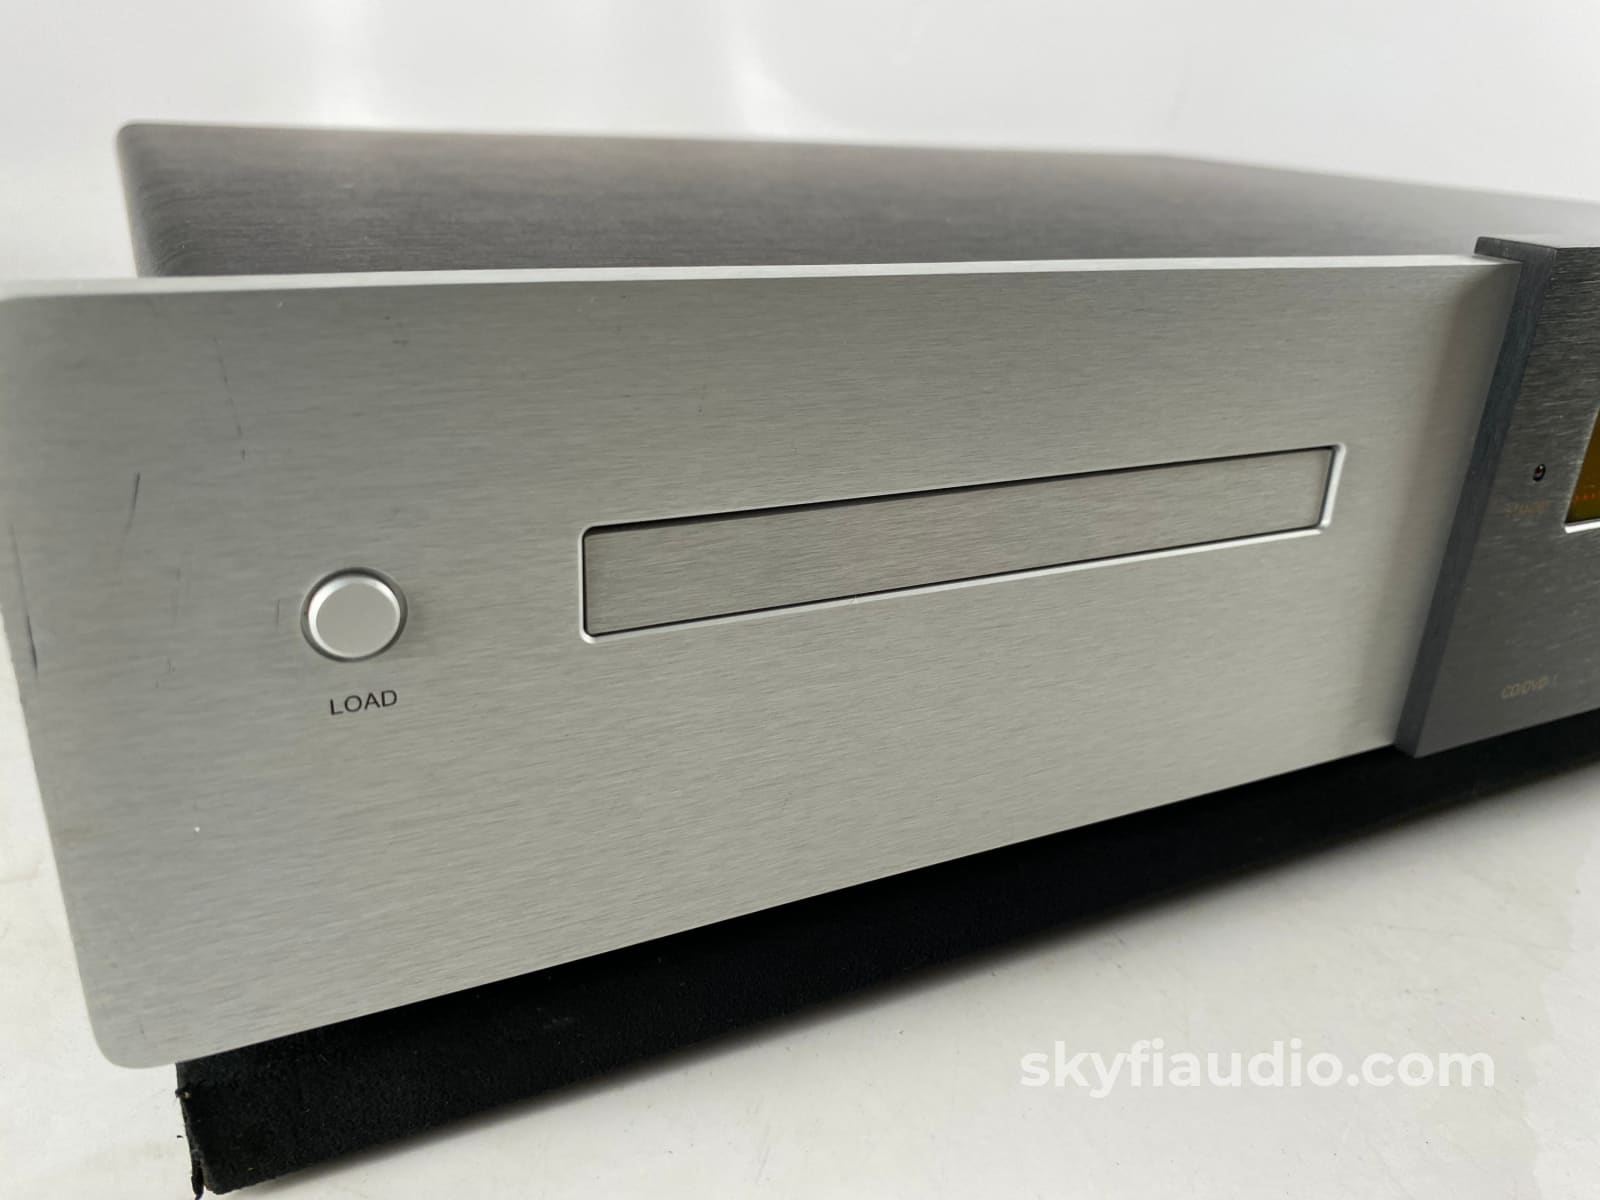 Classe Audio Cd/Dvd-1 Updated Cd-Only Player With Remote Cd + Digital